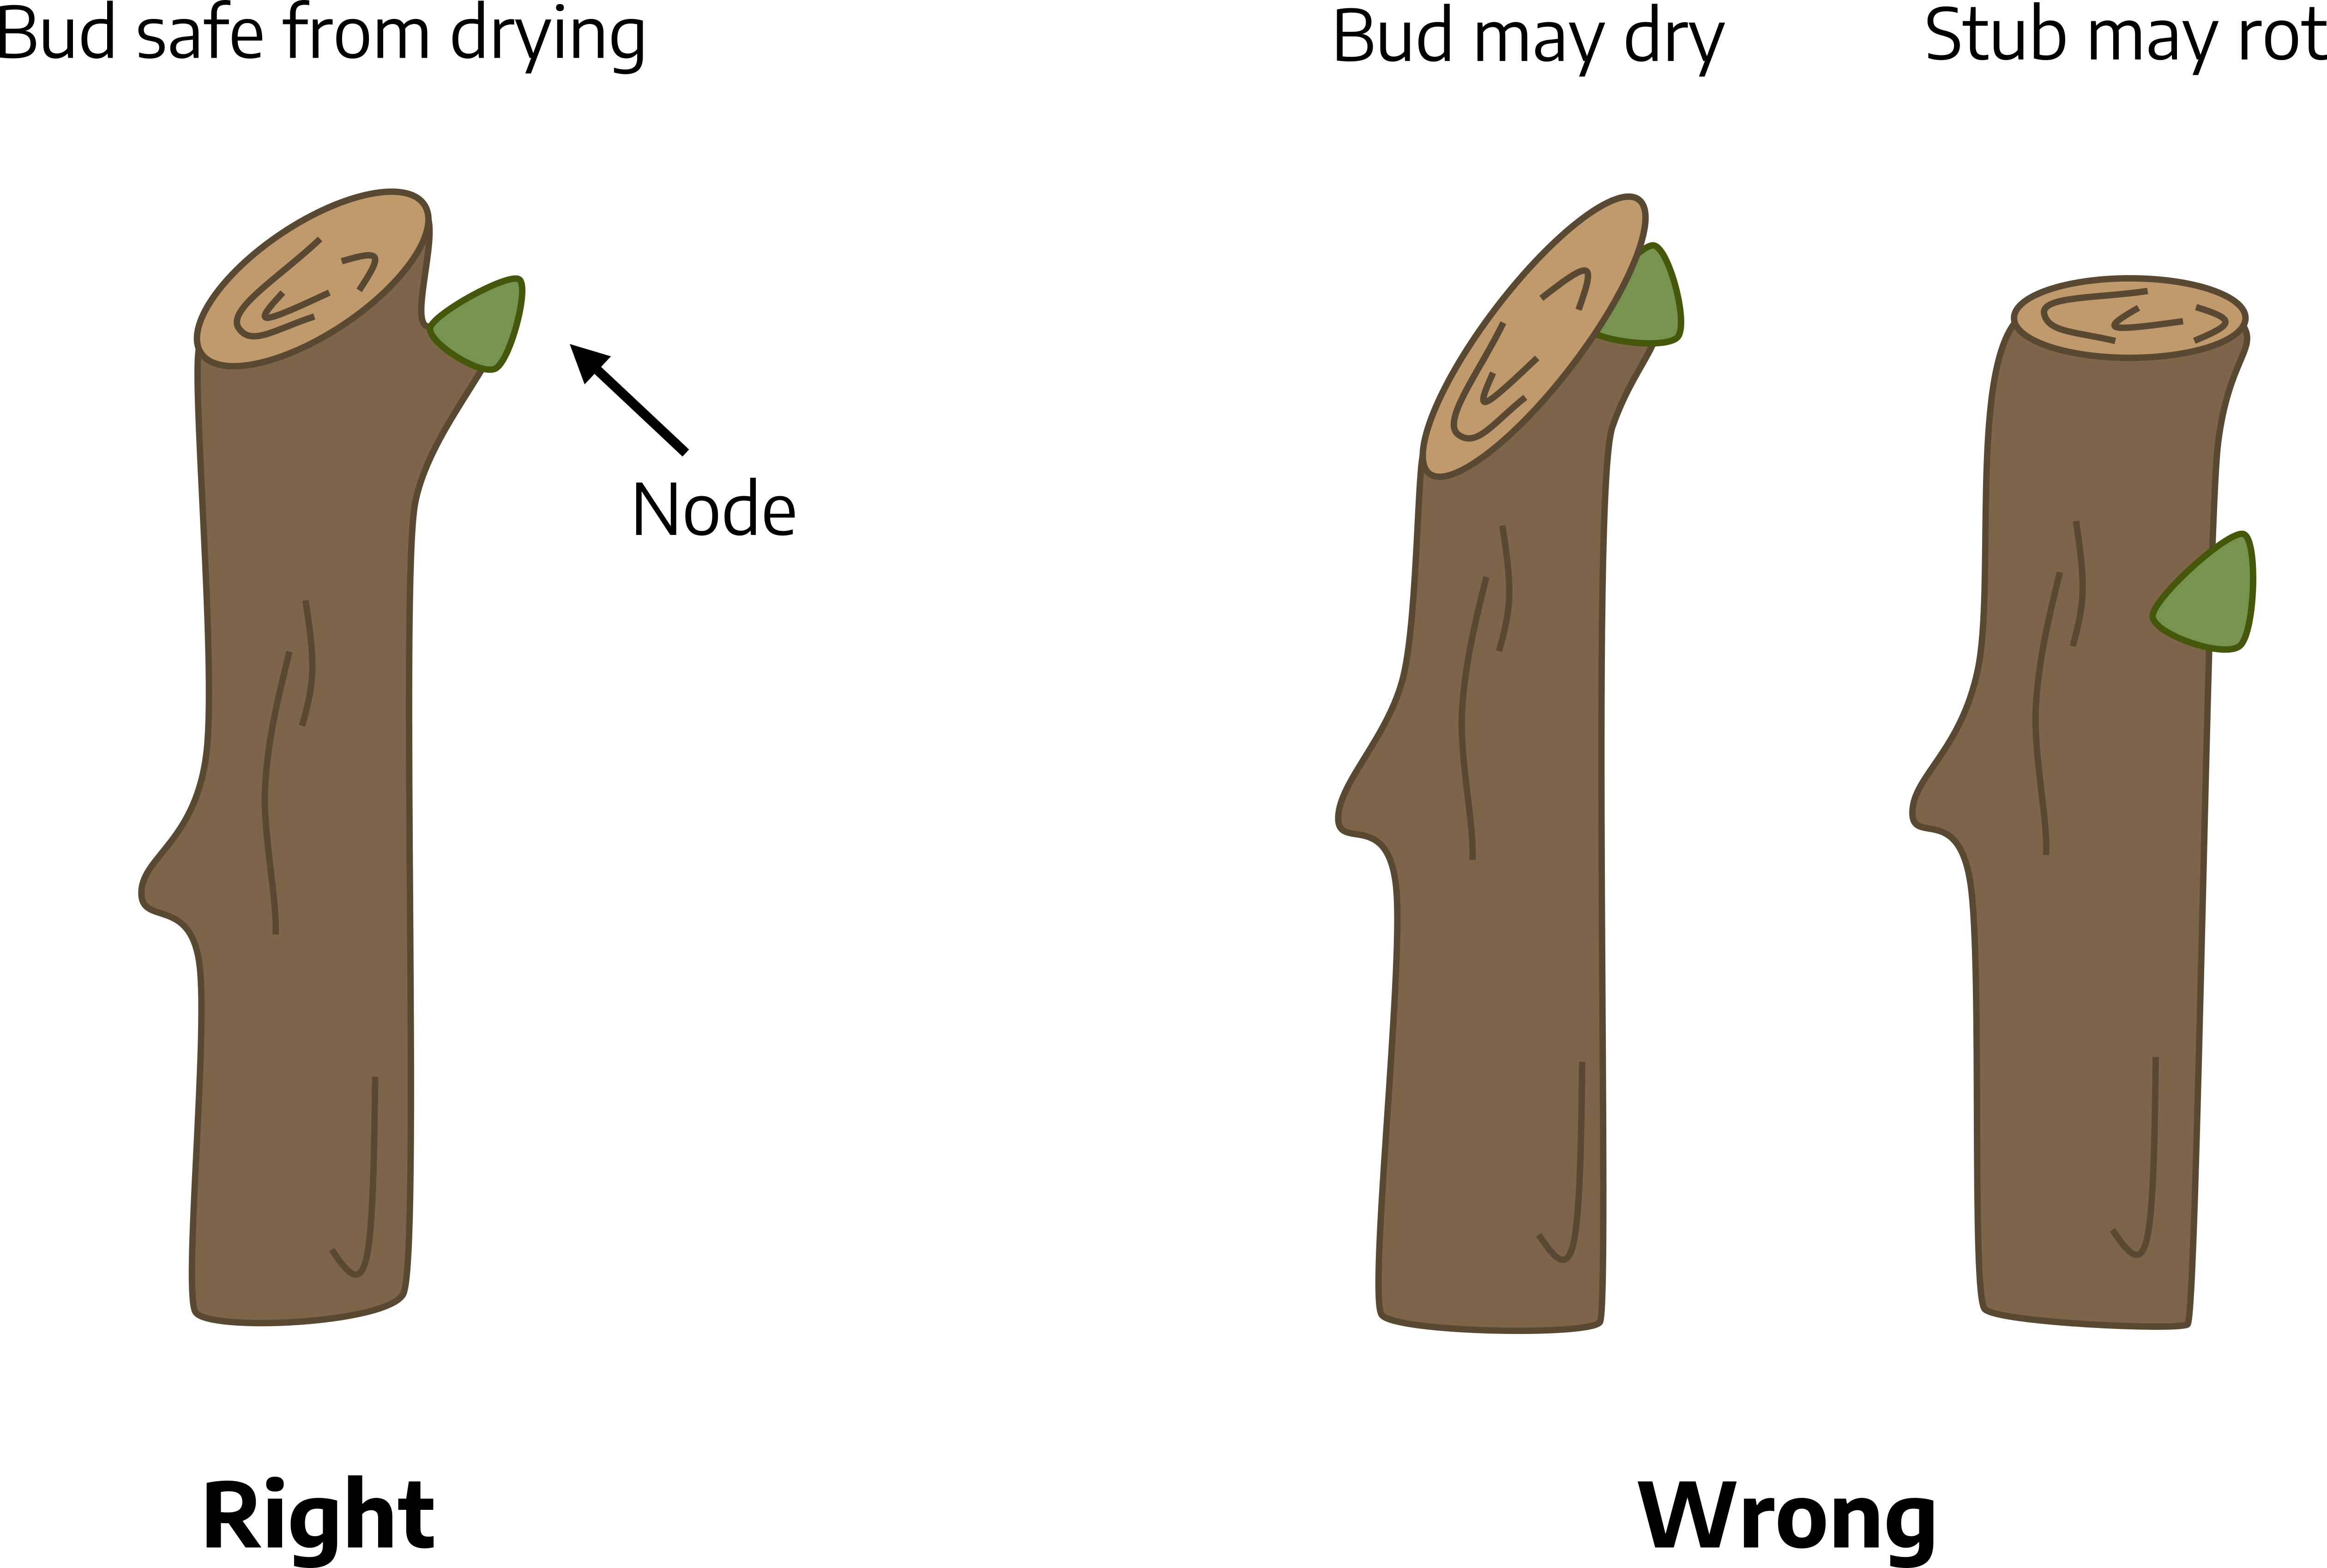 Three cartoon drawings. First is depicting the right angle to prune, labeled "bud safe from drying"; a brown section of tree branch is cut at between a 45 and 30 degree angle with the peak on the right and bottom on the left side, cut directly above a node. Second and third are depicting the wrong angle to prune. The second section of tree branch has a cut between a 60 in 50 degree angle that goes through a node, labeled "bud may dry."  The third section of tree branch has a flat cut far above the node, labeled "stub may rot."